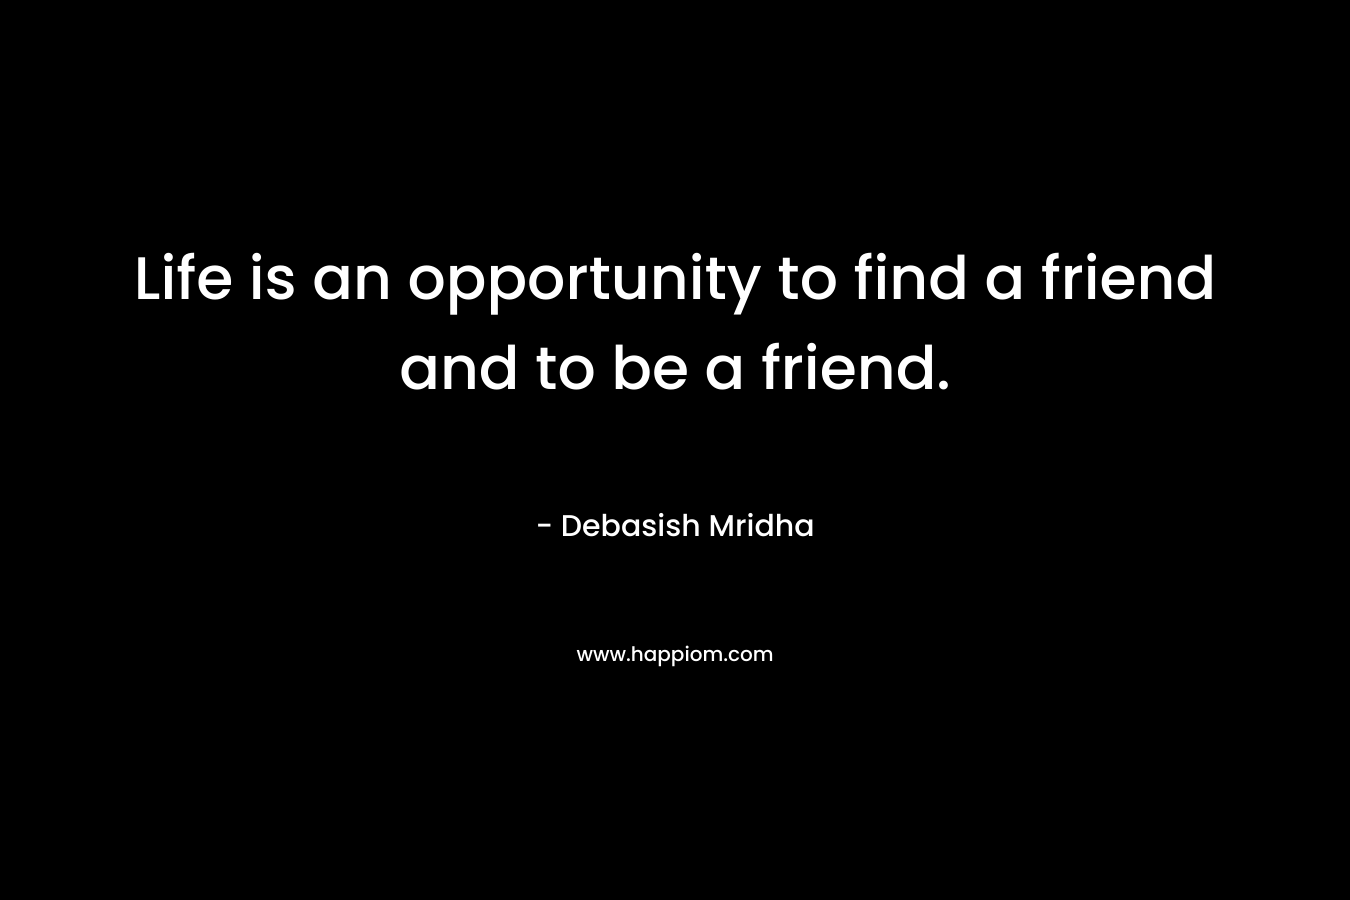 Life is an opportunity to find a friend and to be a friend.